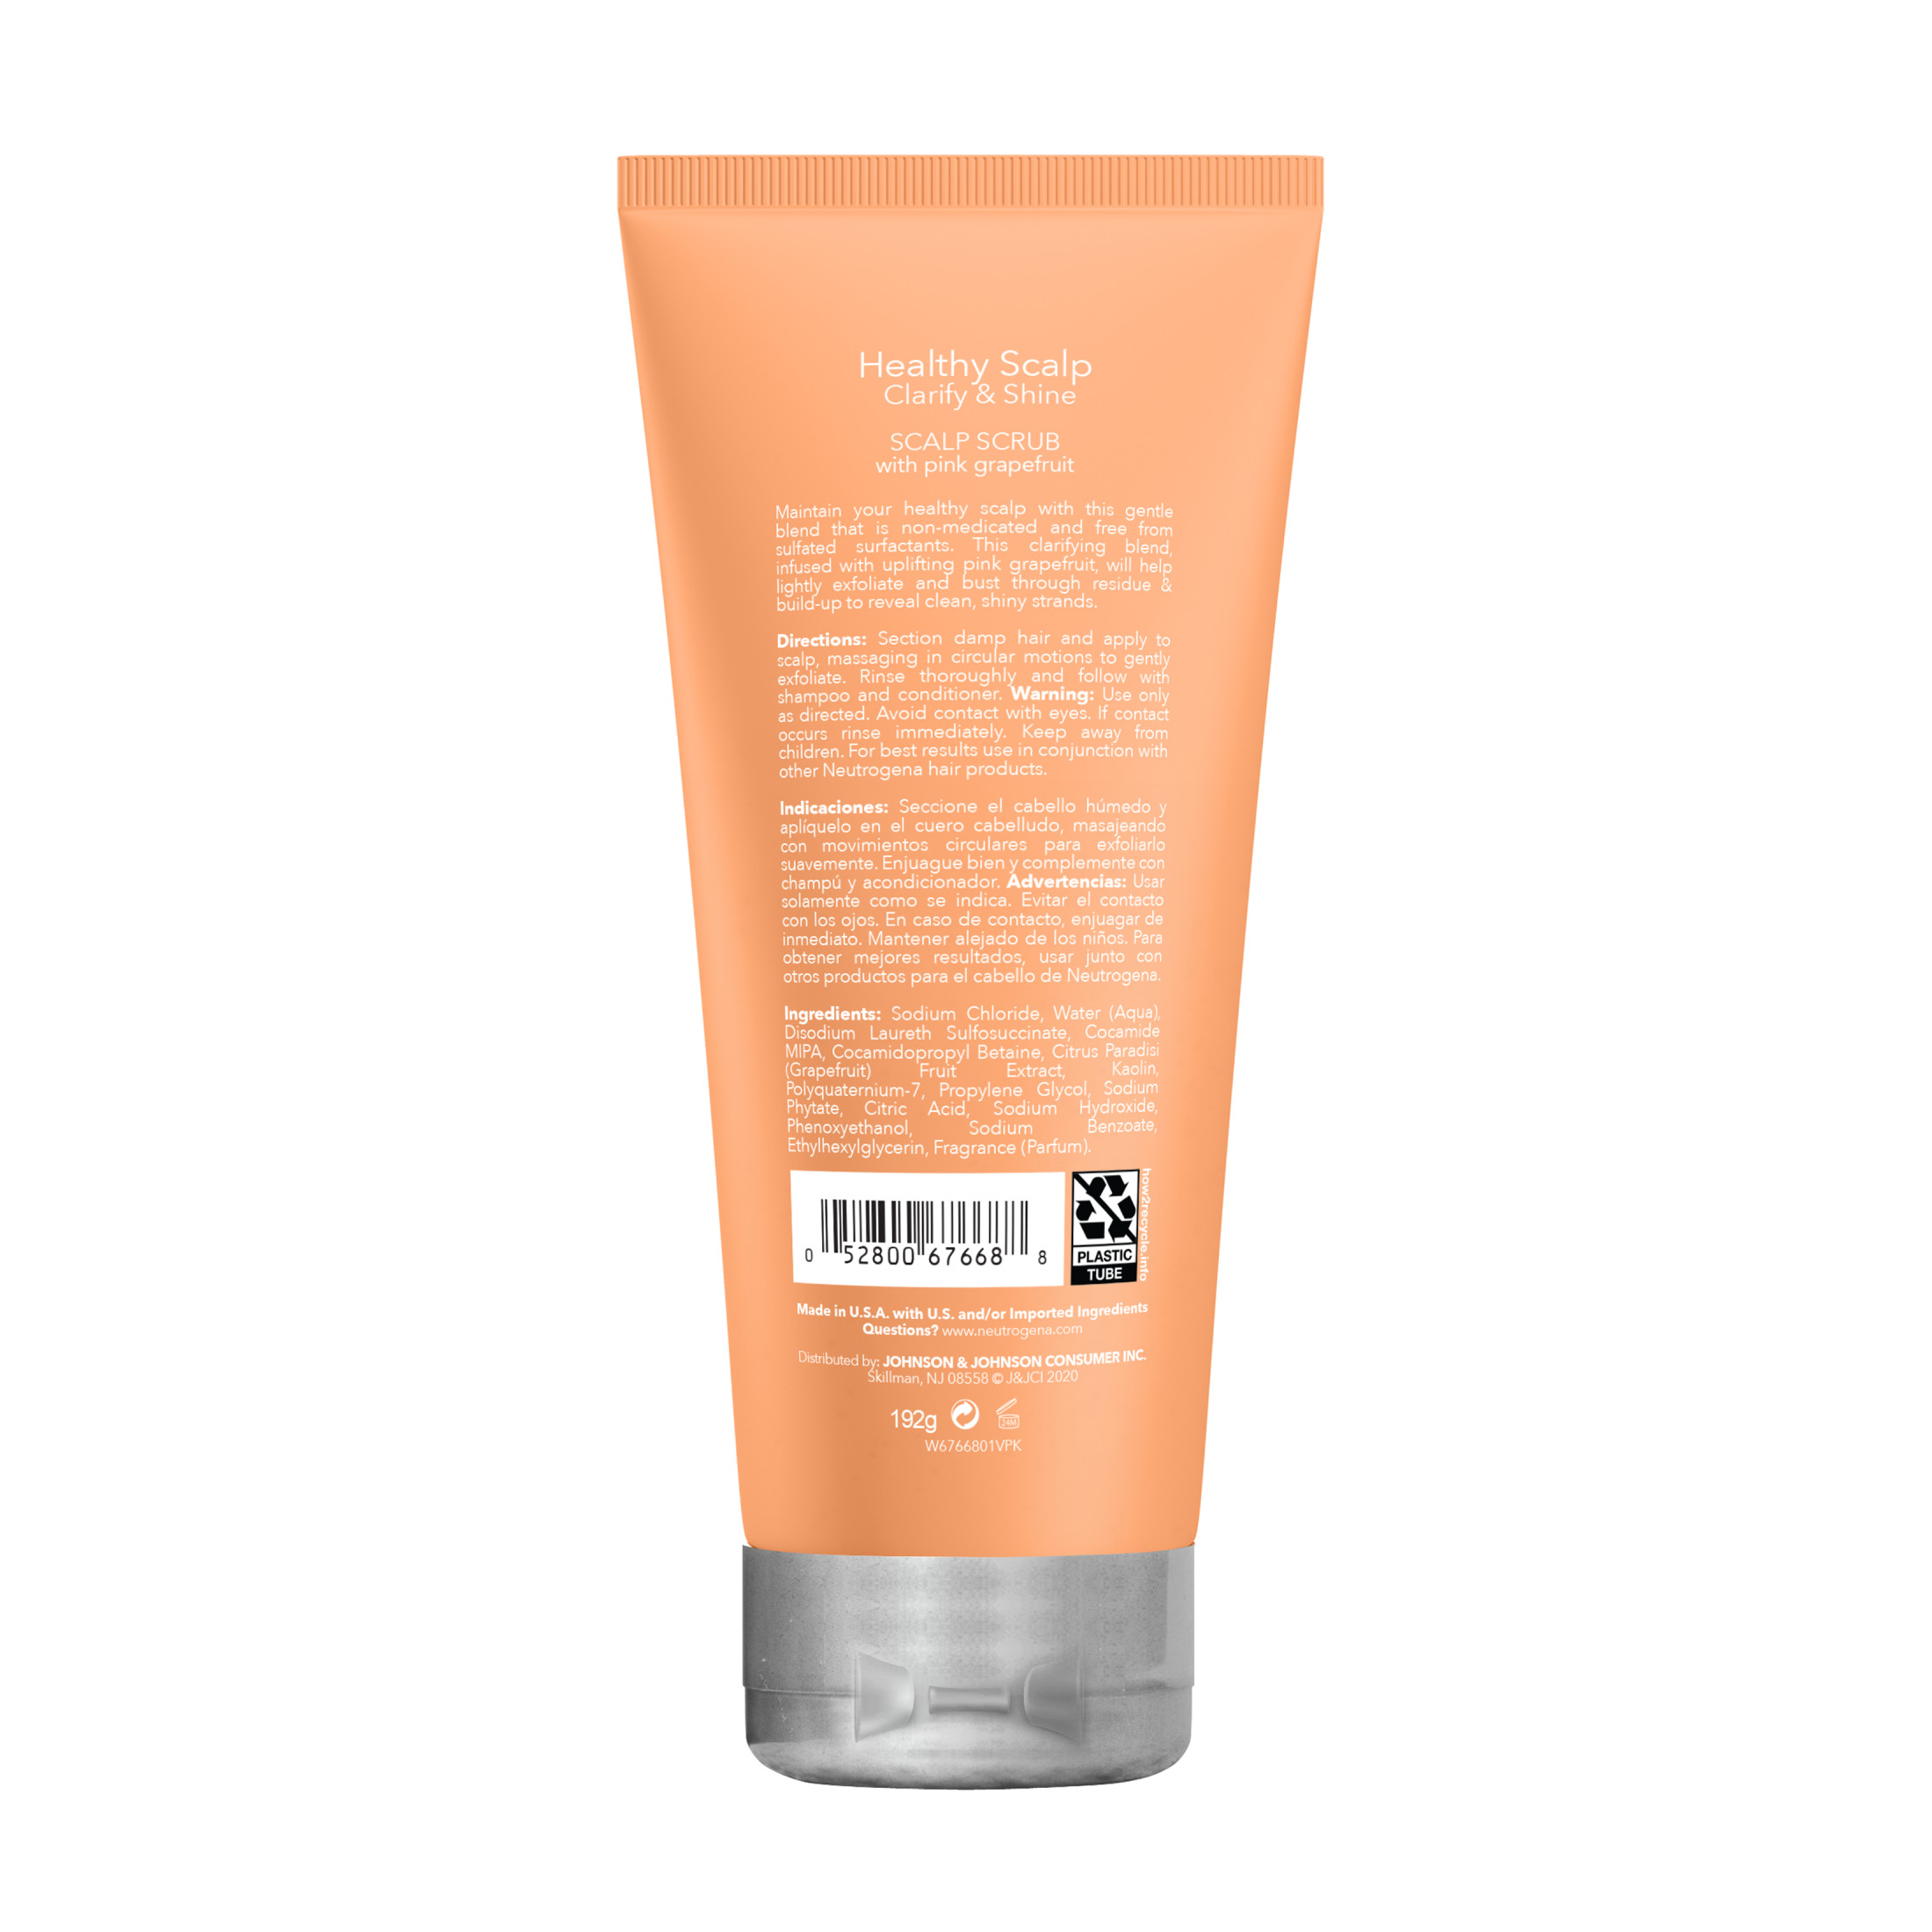 Neutrogena Healthy Scalp Clarify and Shine Scalp Scrub with Pink Grapefruit, for Exfoliating, Clarifying, Cleaner Hair, Hair Mask, Vitamin C, 6.8 fl. oz. - image 3 of 10